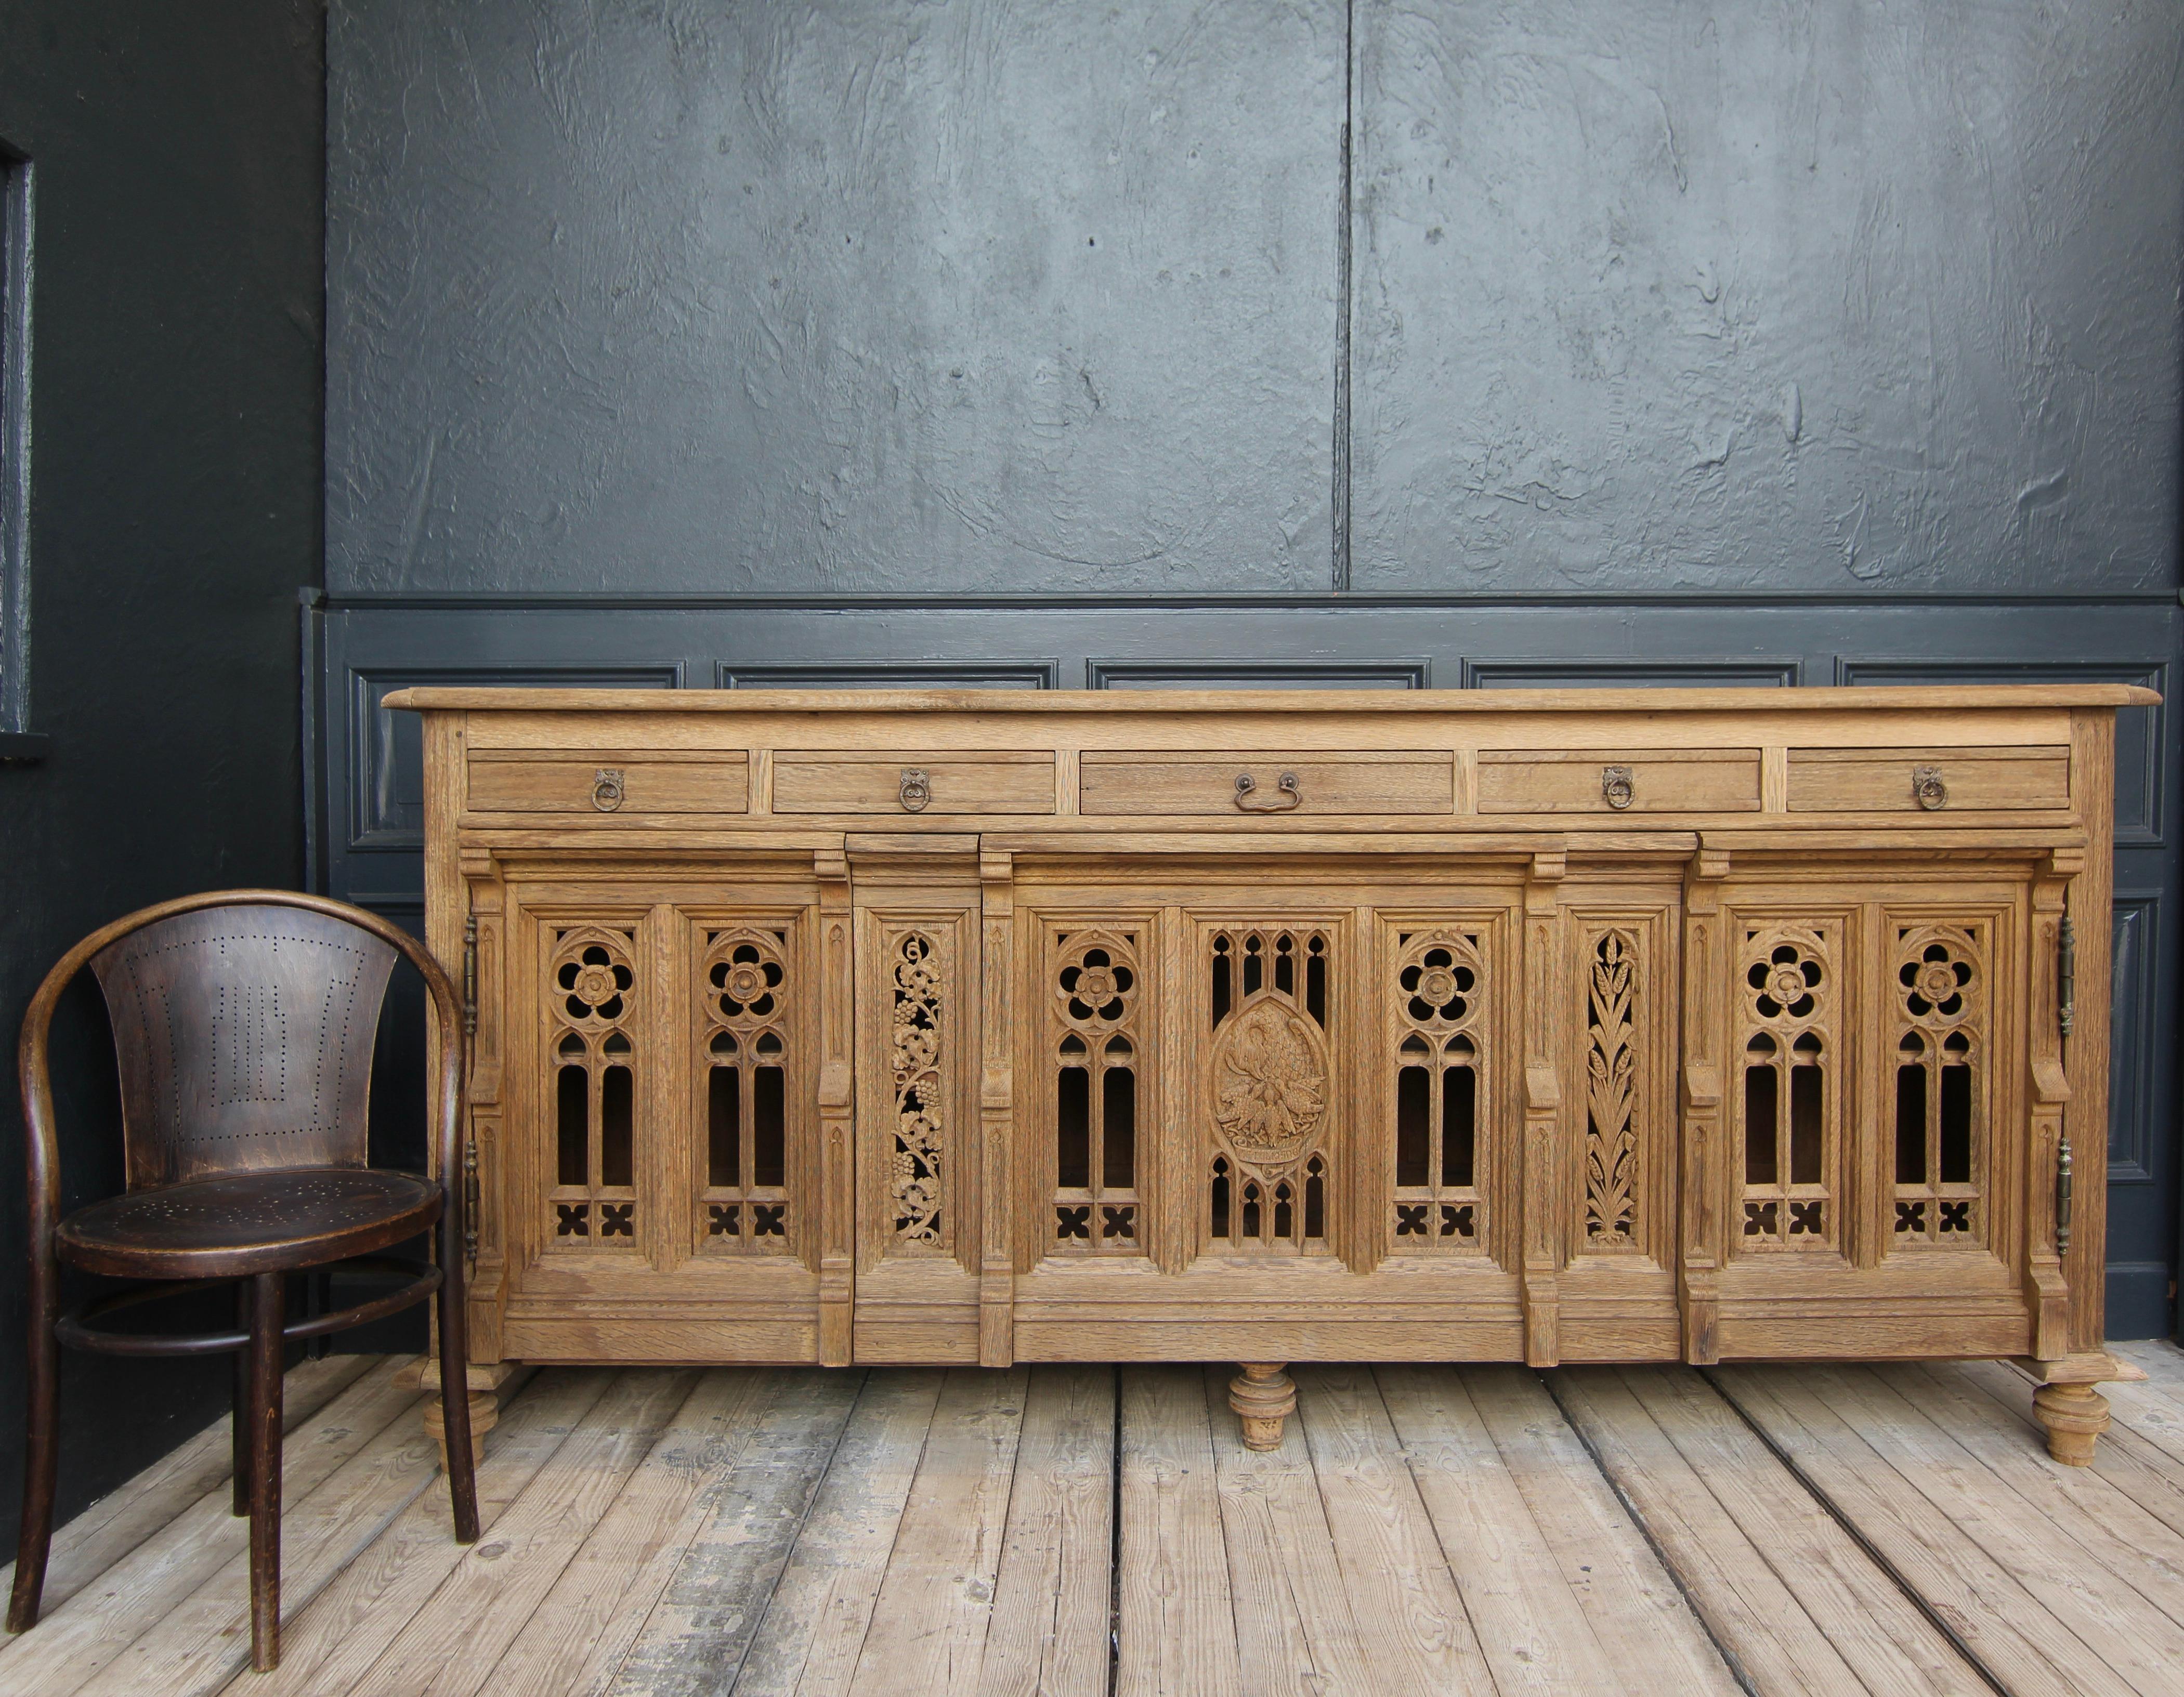 A late 19th century or early 20th century one of a kind gothic revival sideboard from a church made of solid oak.

Stripped and sanded of the old wax, revealing the beautiful surface and texture of the natural oak wood.

Half-height corpus with